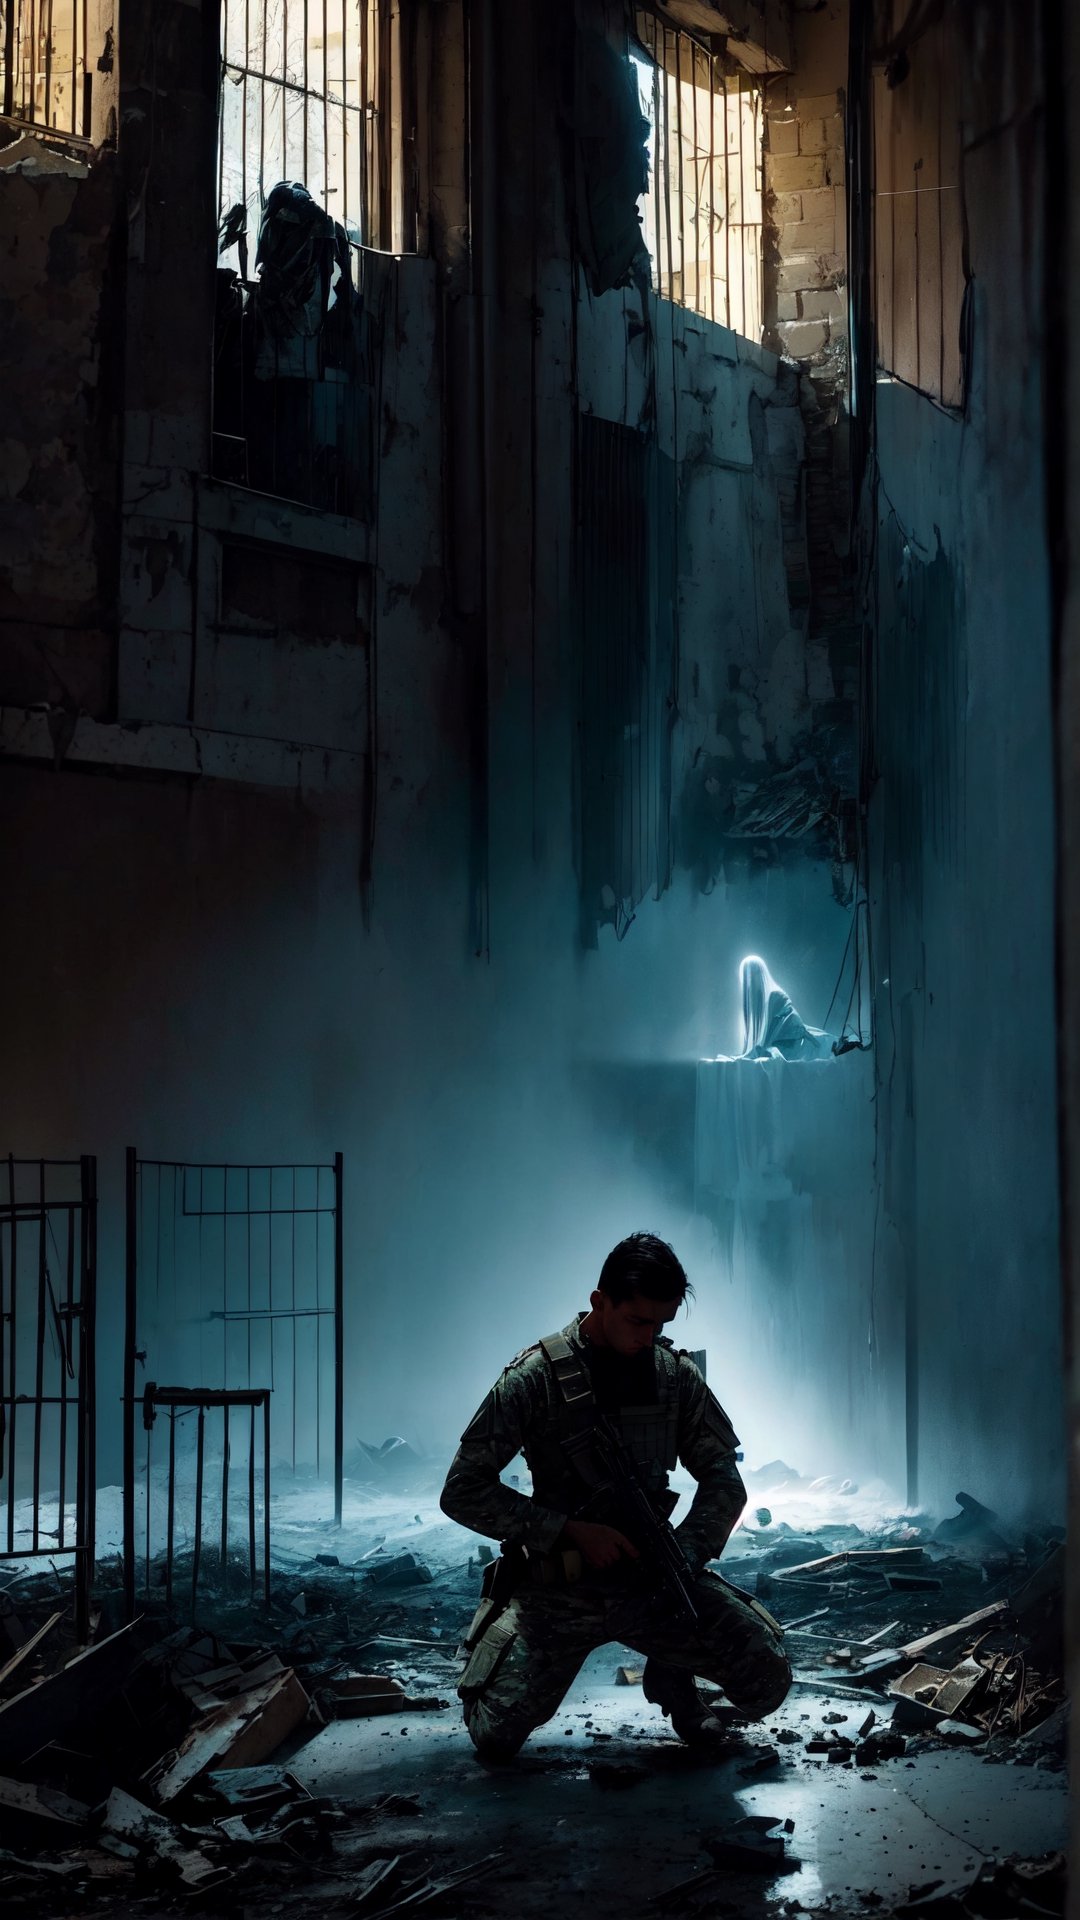 "A sorrowful modern soldier kneels, tears streaming, amidst a vast gathering of ethereal apparitions, embodying the souls of fallen individuals in a war-torn city. This hauntingly beautiful scene, reminiscent of a masterful painting, captures the soldier's anguish with intense emotion. Meticulously depicted, each ghostly figures radiates a soft glow amidst the city's ruins, creating a surreal tableau. The artist's skillful brushwork and meticulous attention to detail elevate this stunning artwork, evoking profound emotions in the viewer."
,photo r3al,r4w photo,Prison,Jail